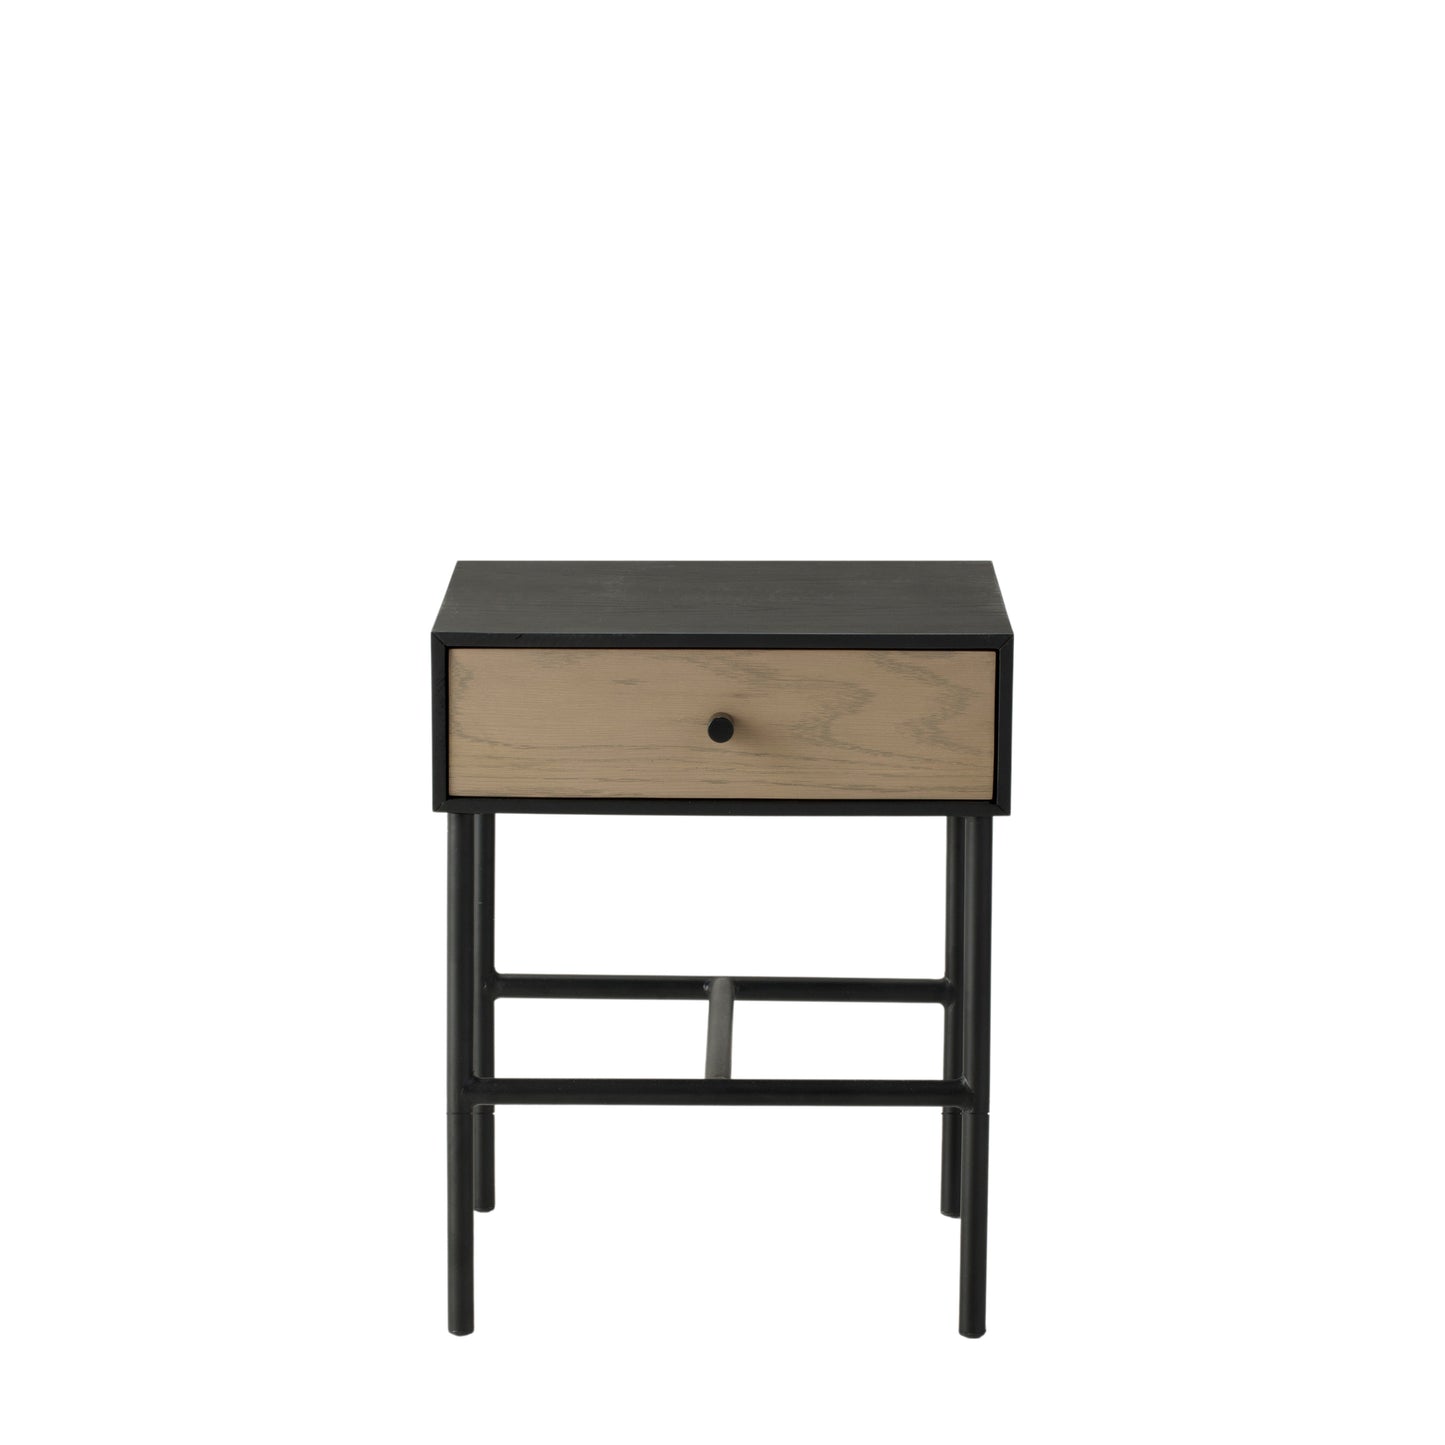 A stylish Prawle 1 Drawer Bedside Table for interior decor.